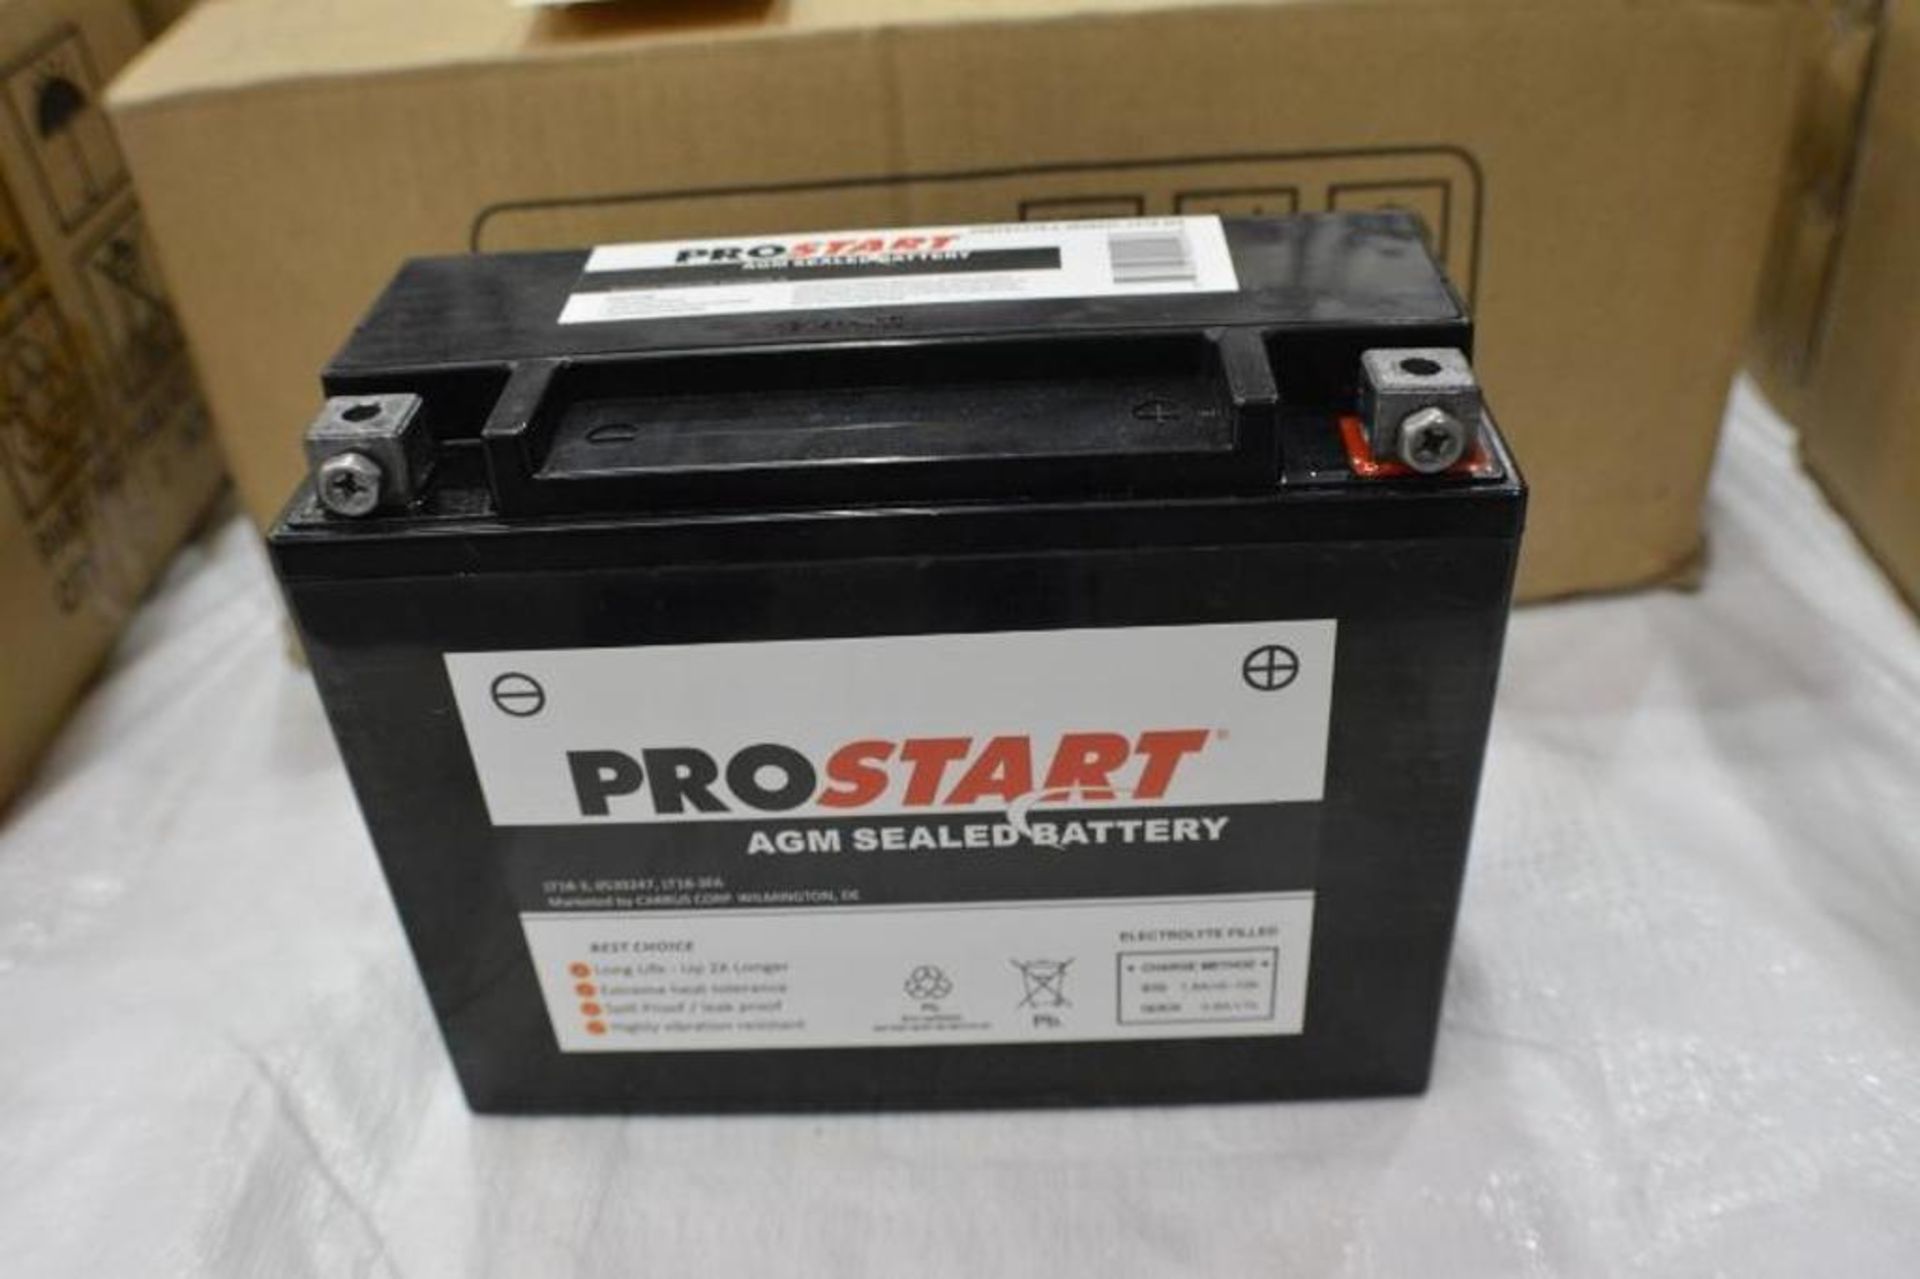 Battery LT18.3 for Motorcycles/ATV/Jet Skis/Lawn Garden/ Scooters by Prostart. Qty. 10 x $ - Image 2 of 3